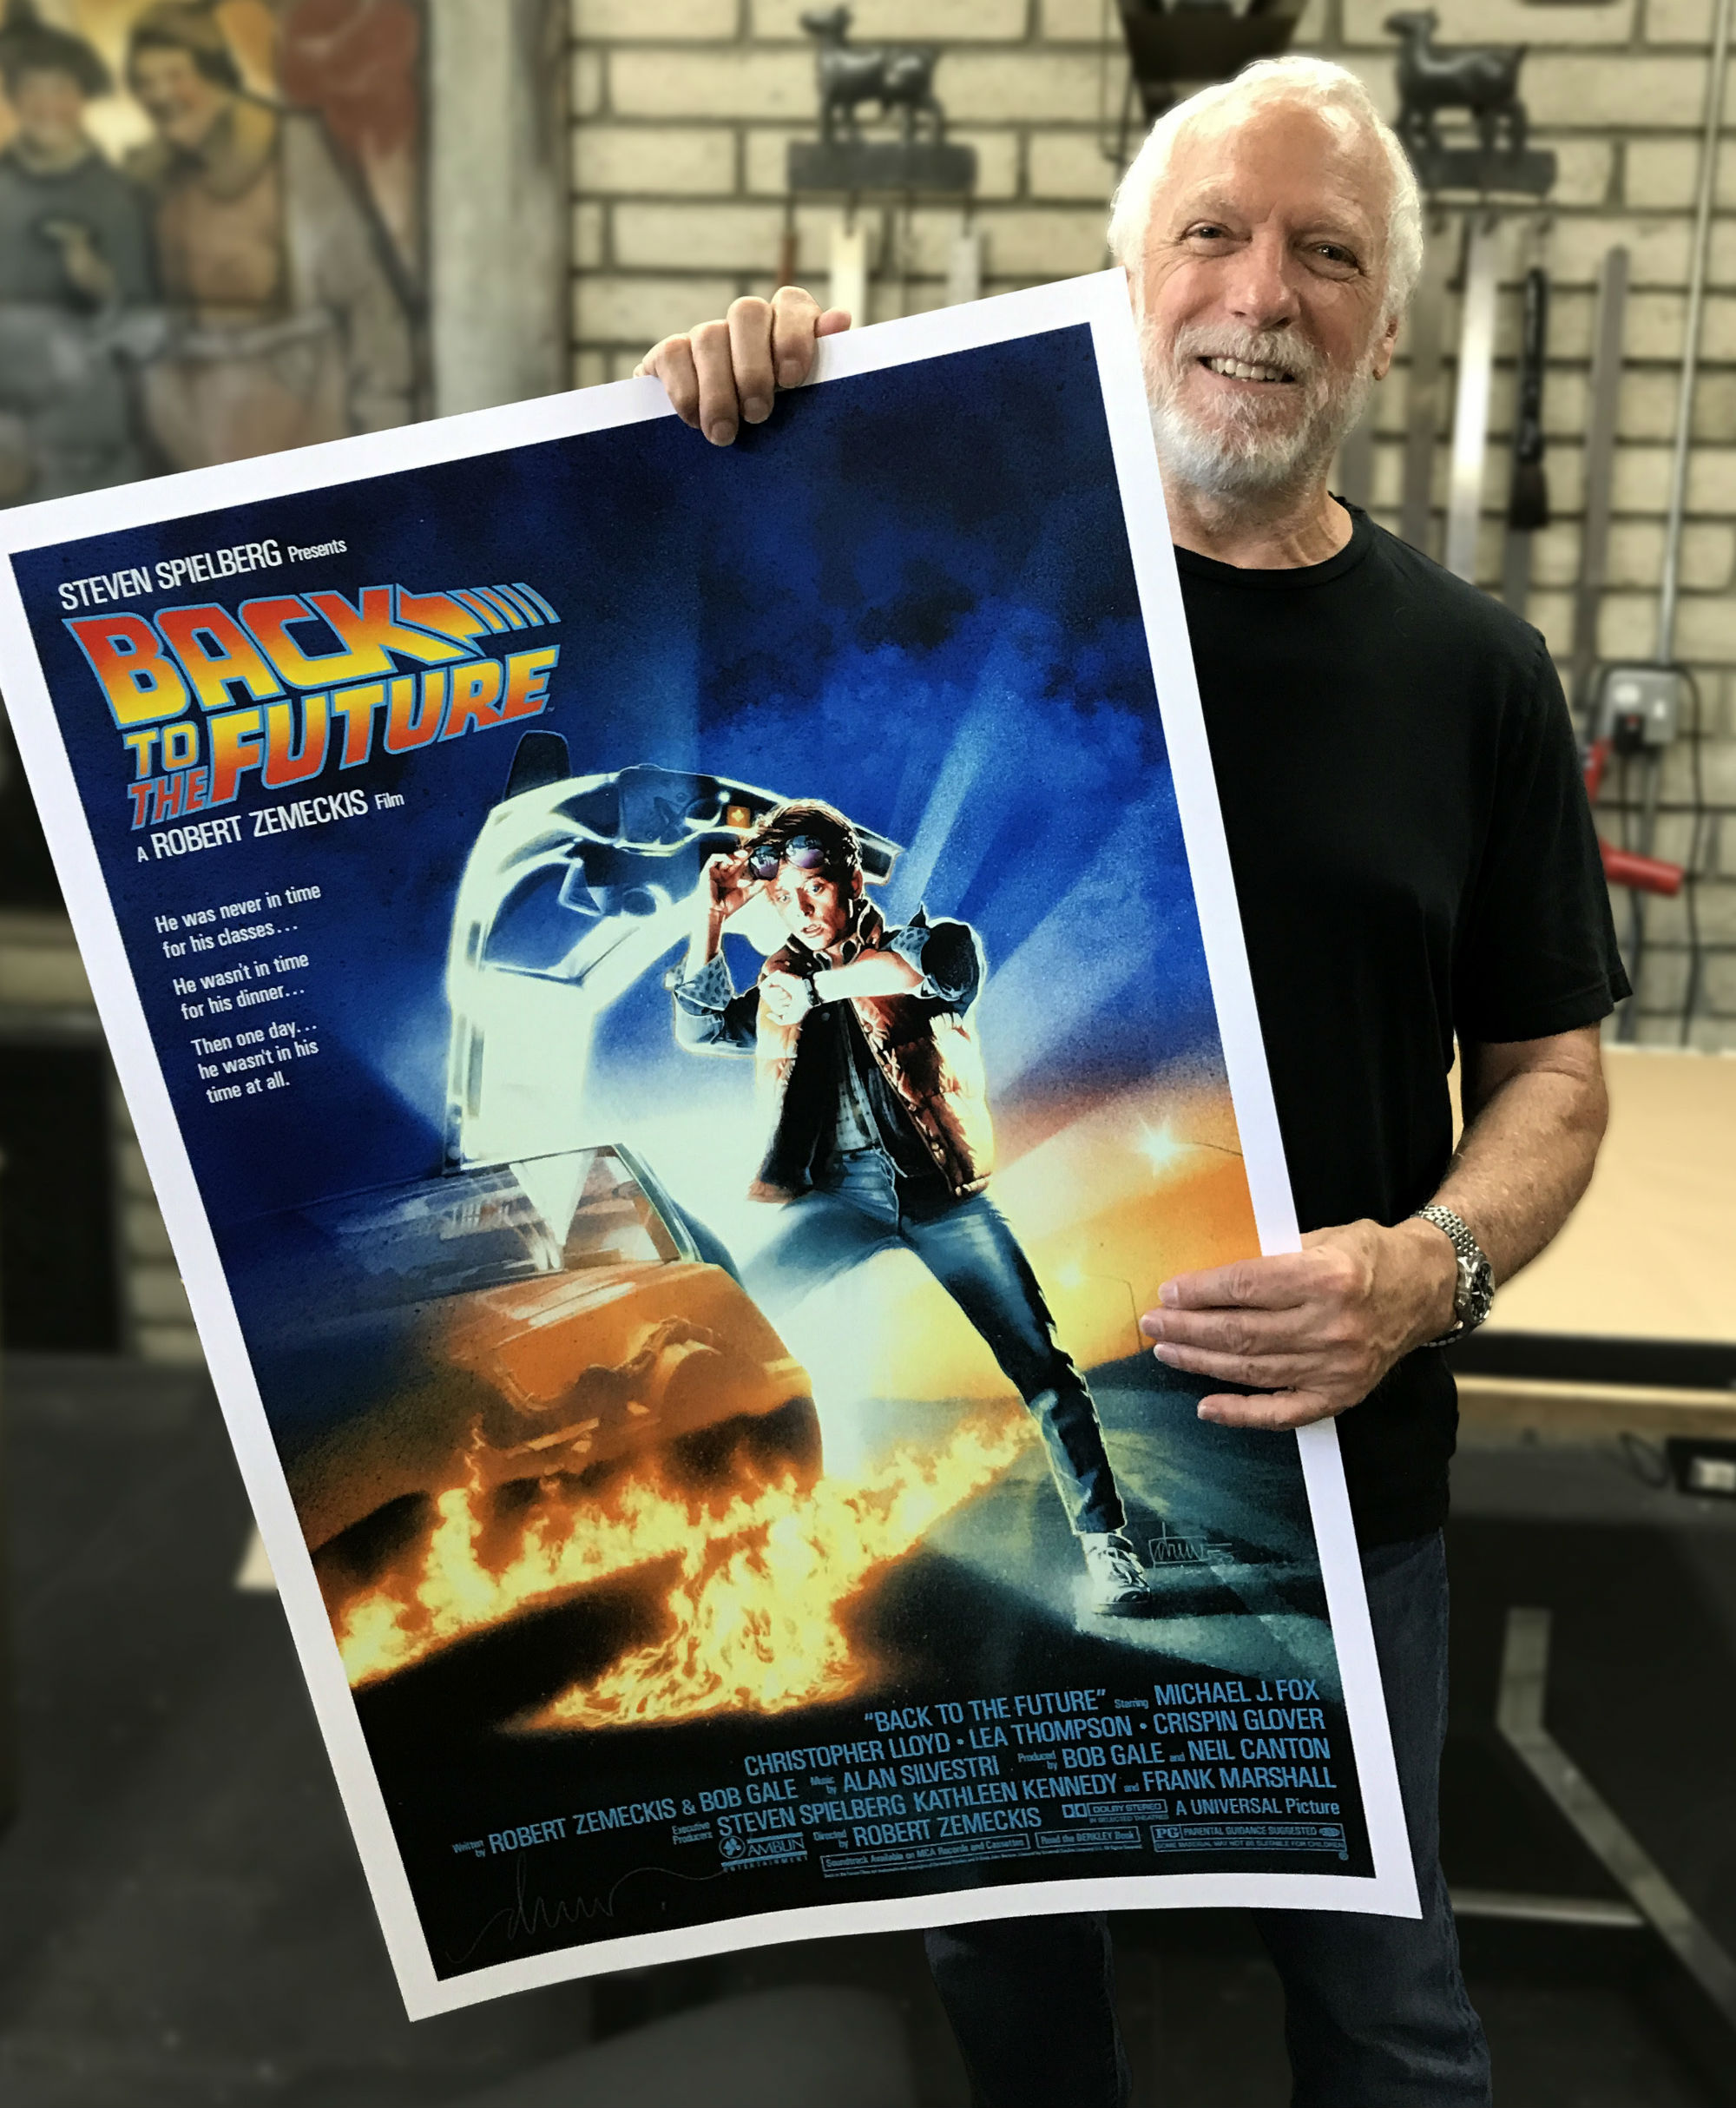 Drew Struzan’s Iconic Back To The Future Poster Just Got An Upgrade